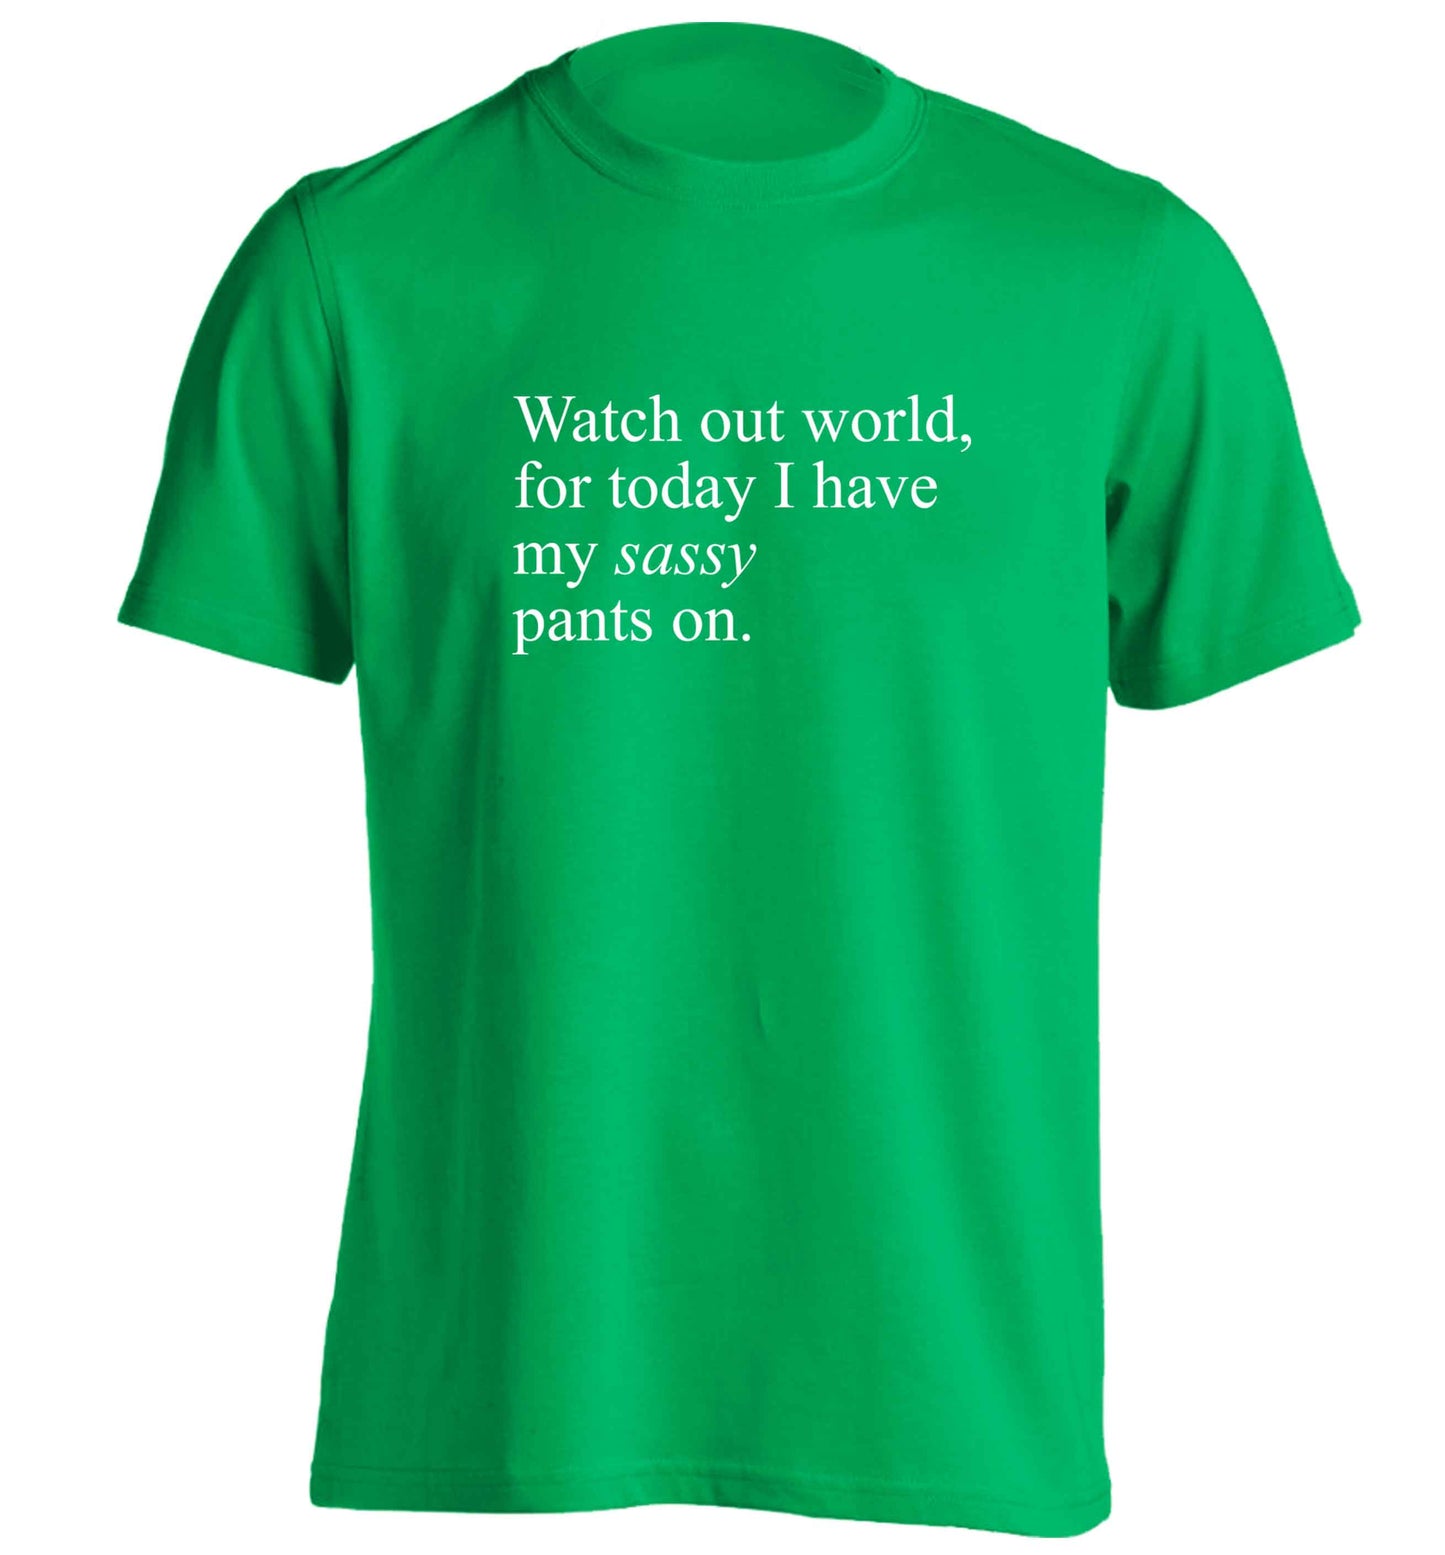 Watch out world for today I have my sassy pants on adults unisex green Tshirt 2XL